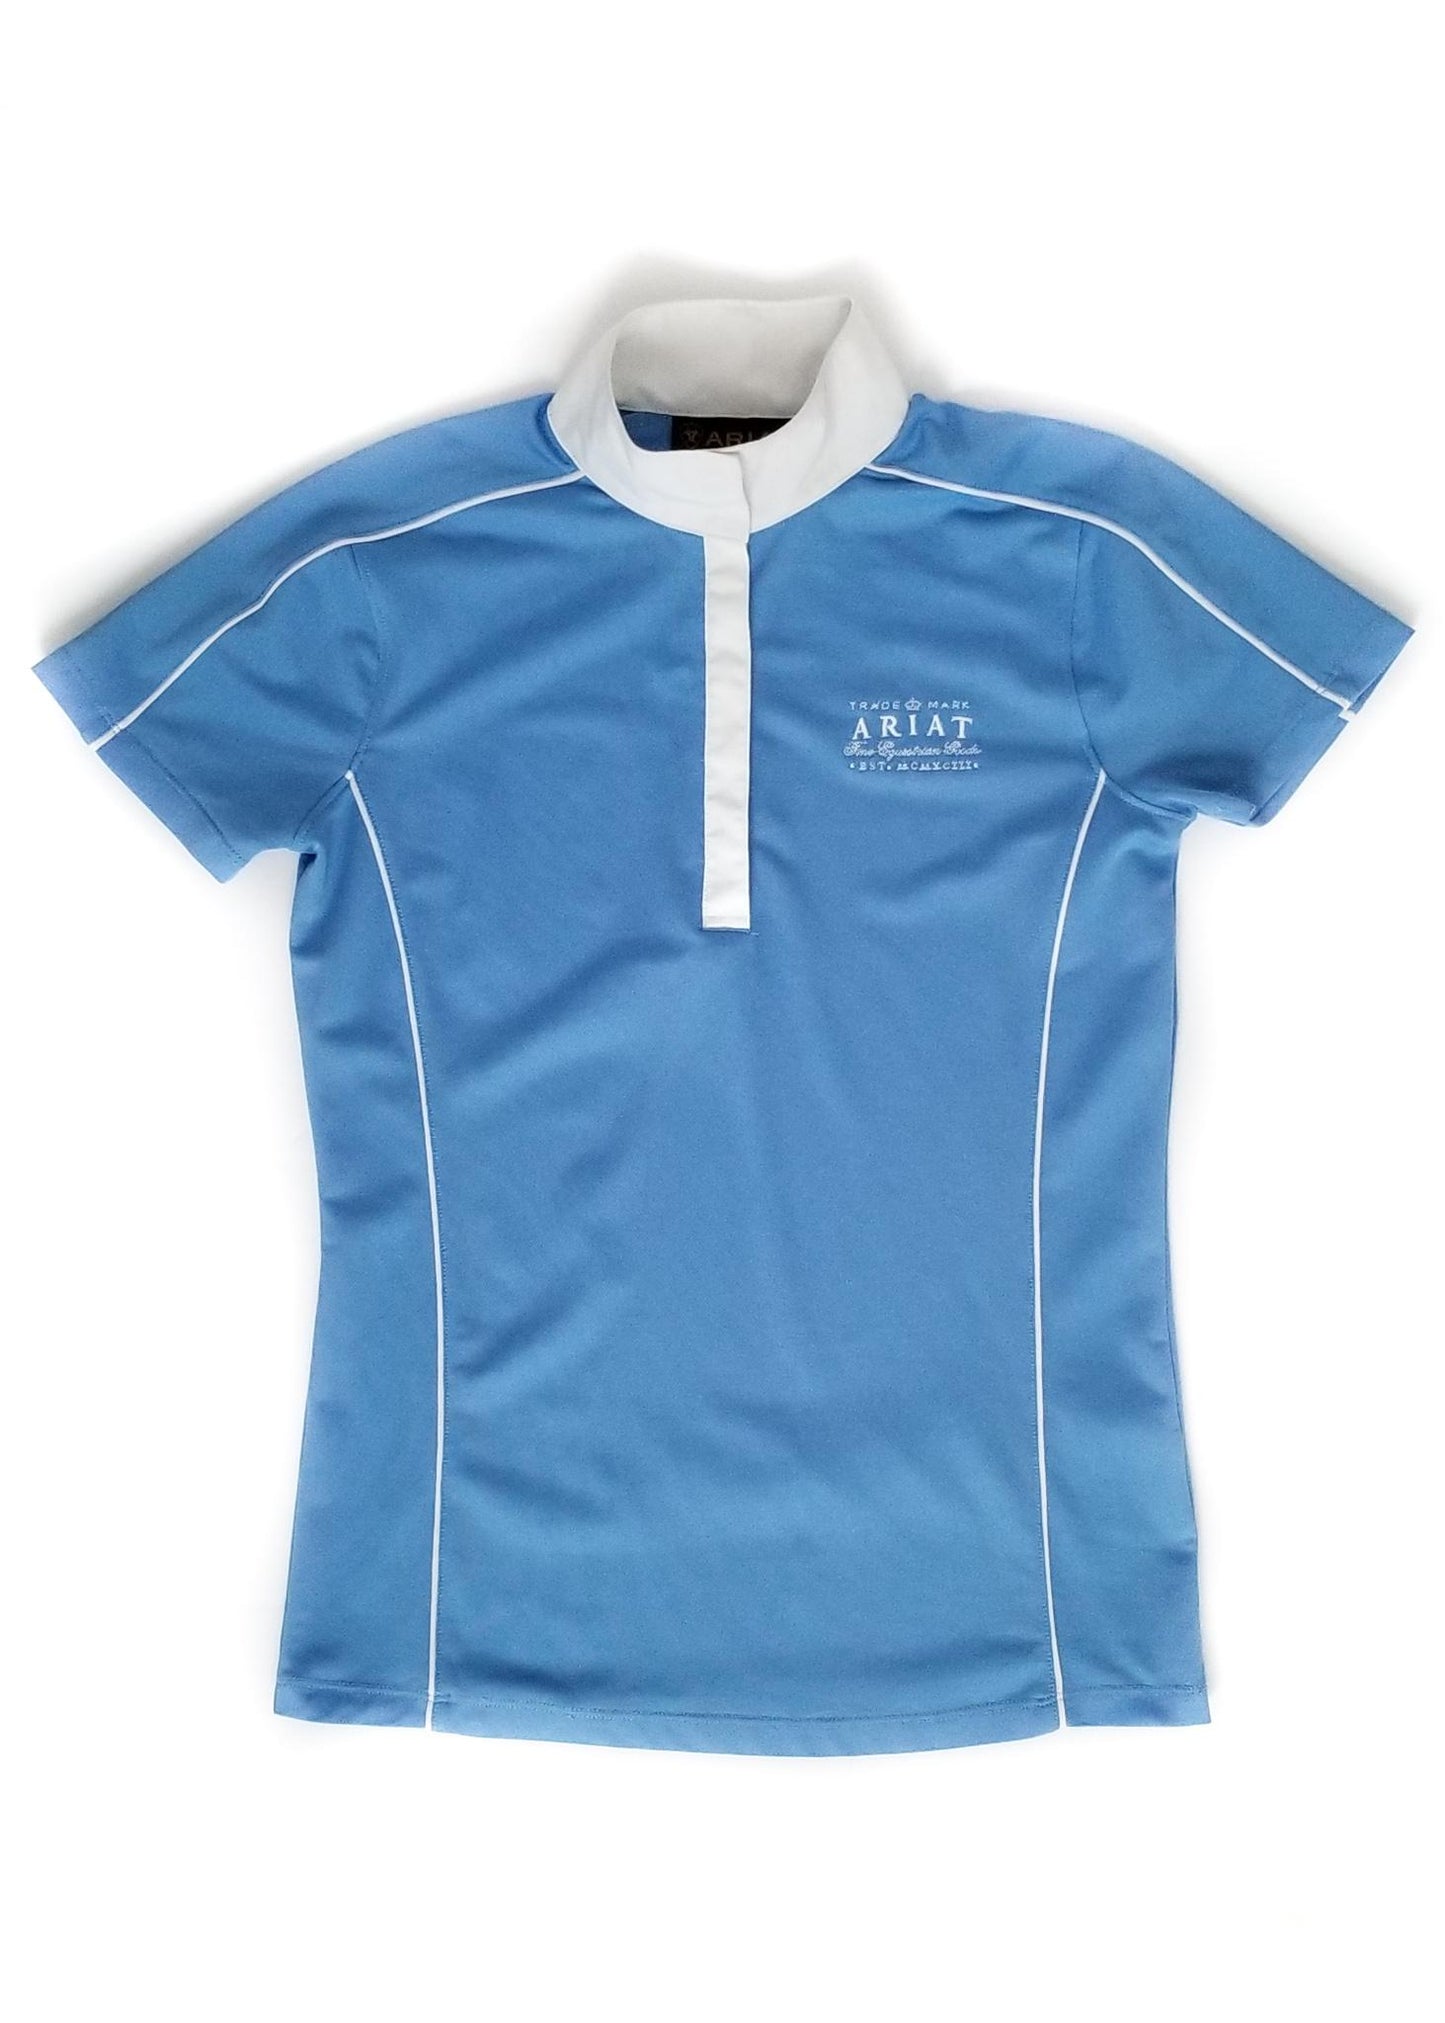 Ariat Pro Series Competition Shirt - Blue and White - Women's Small